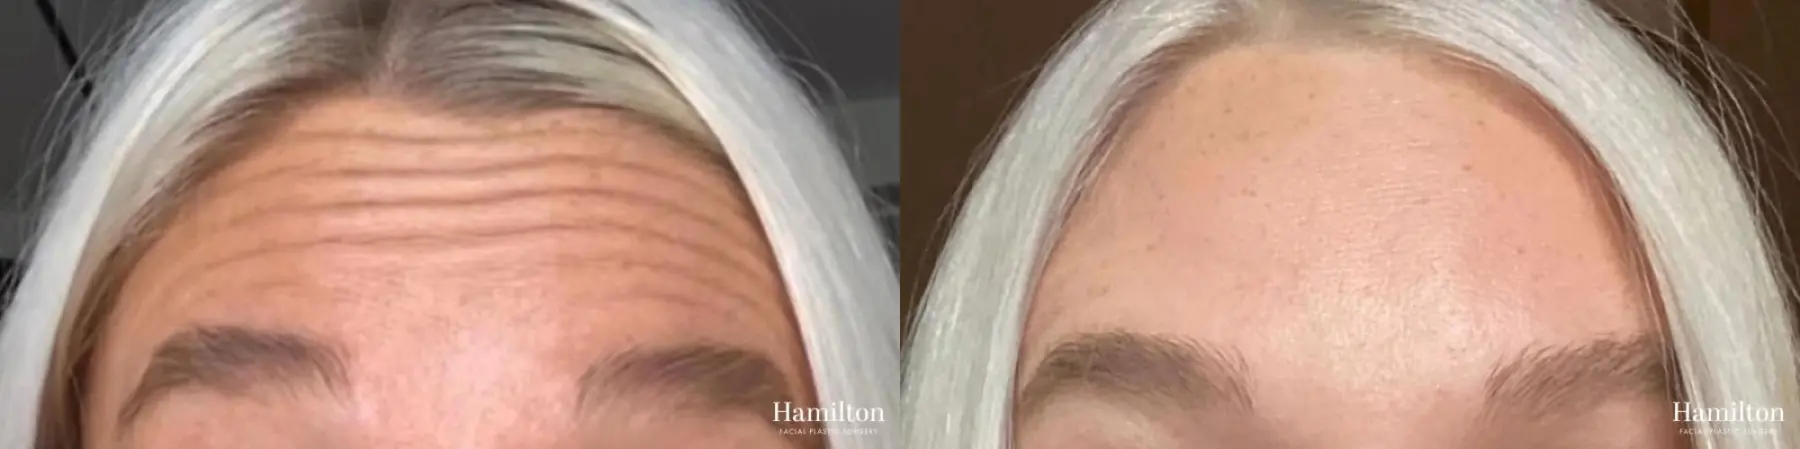 BOTOX® Cosmetic: Patient 1 - Before and After 1